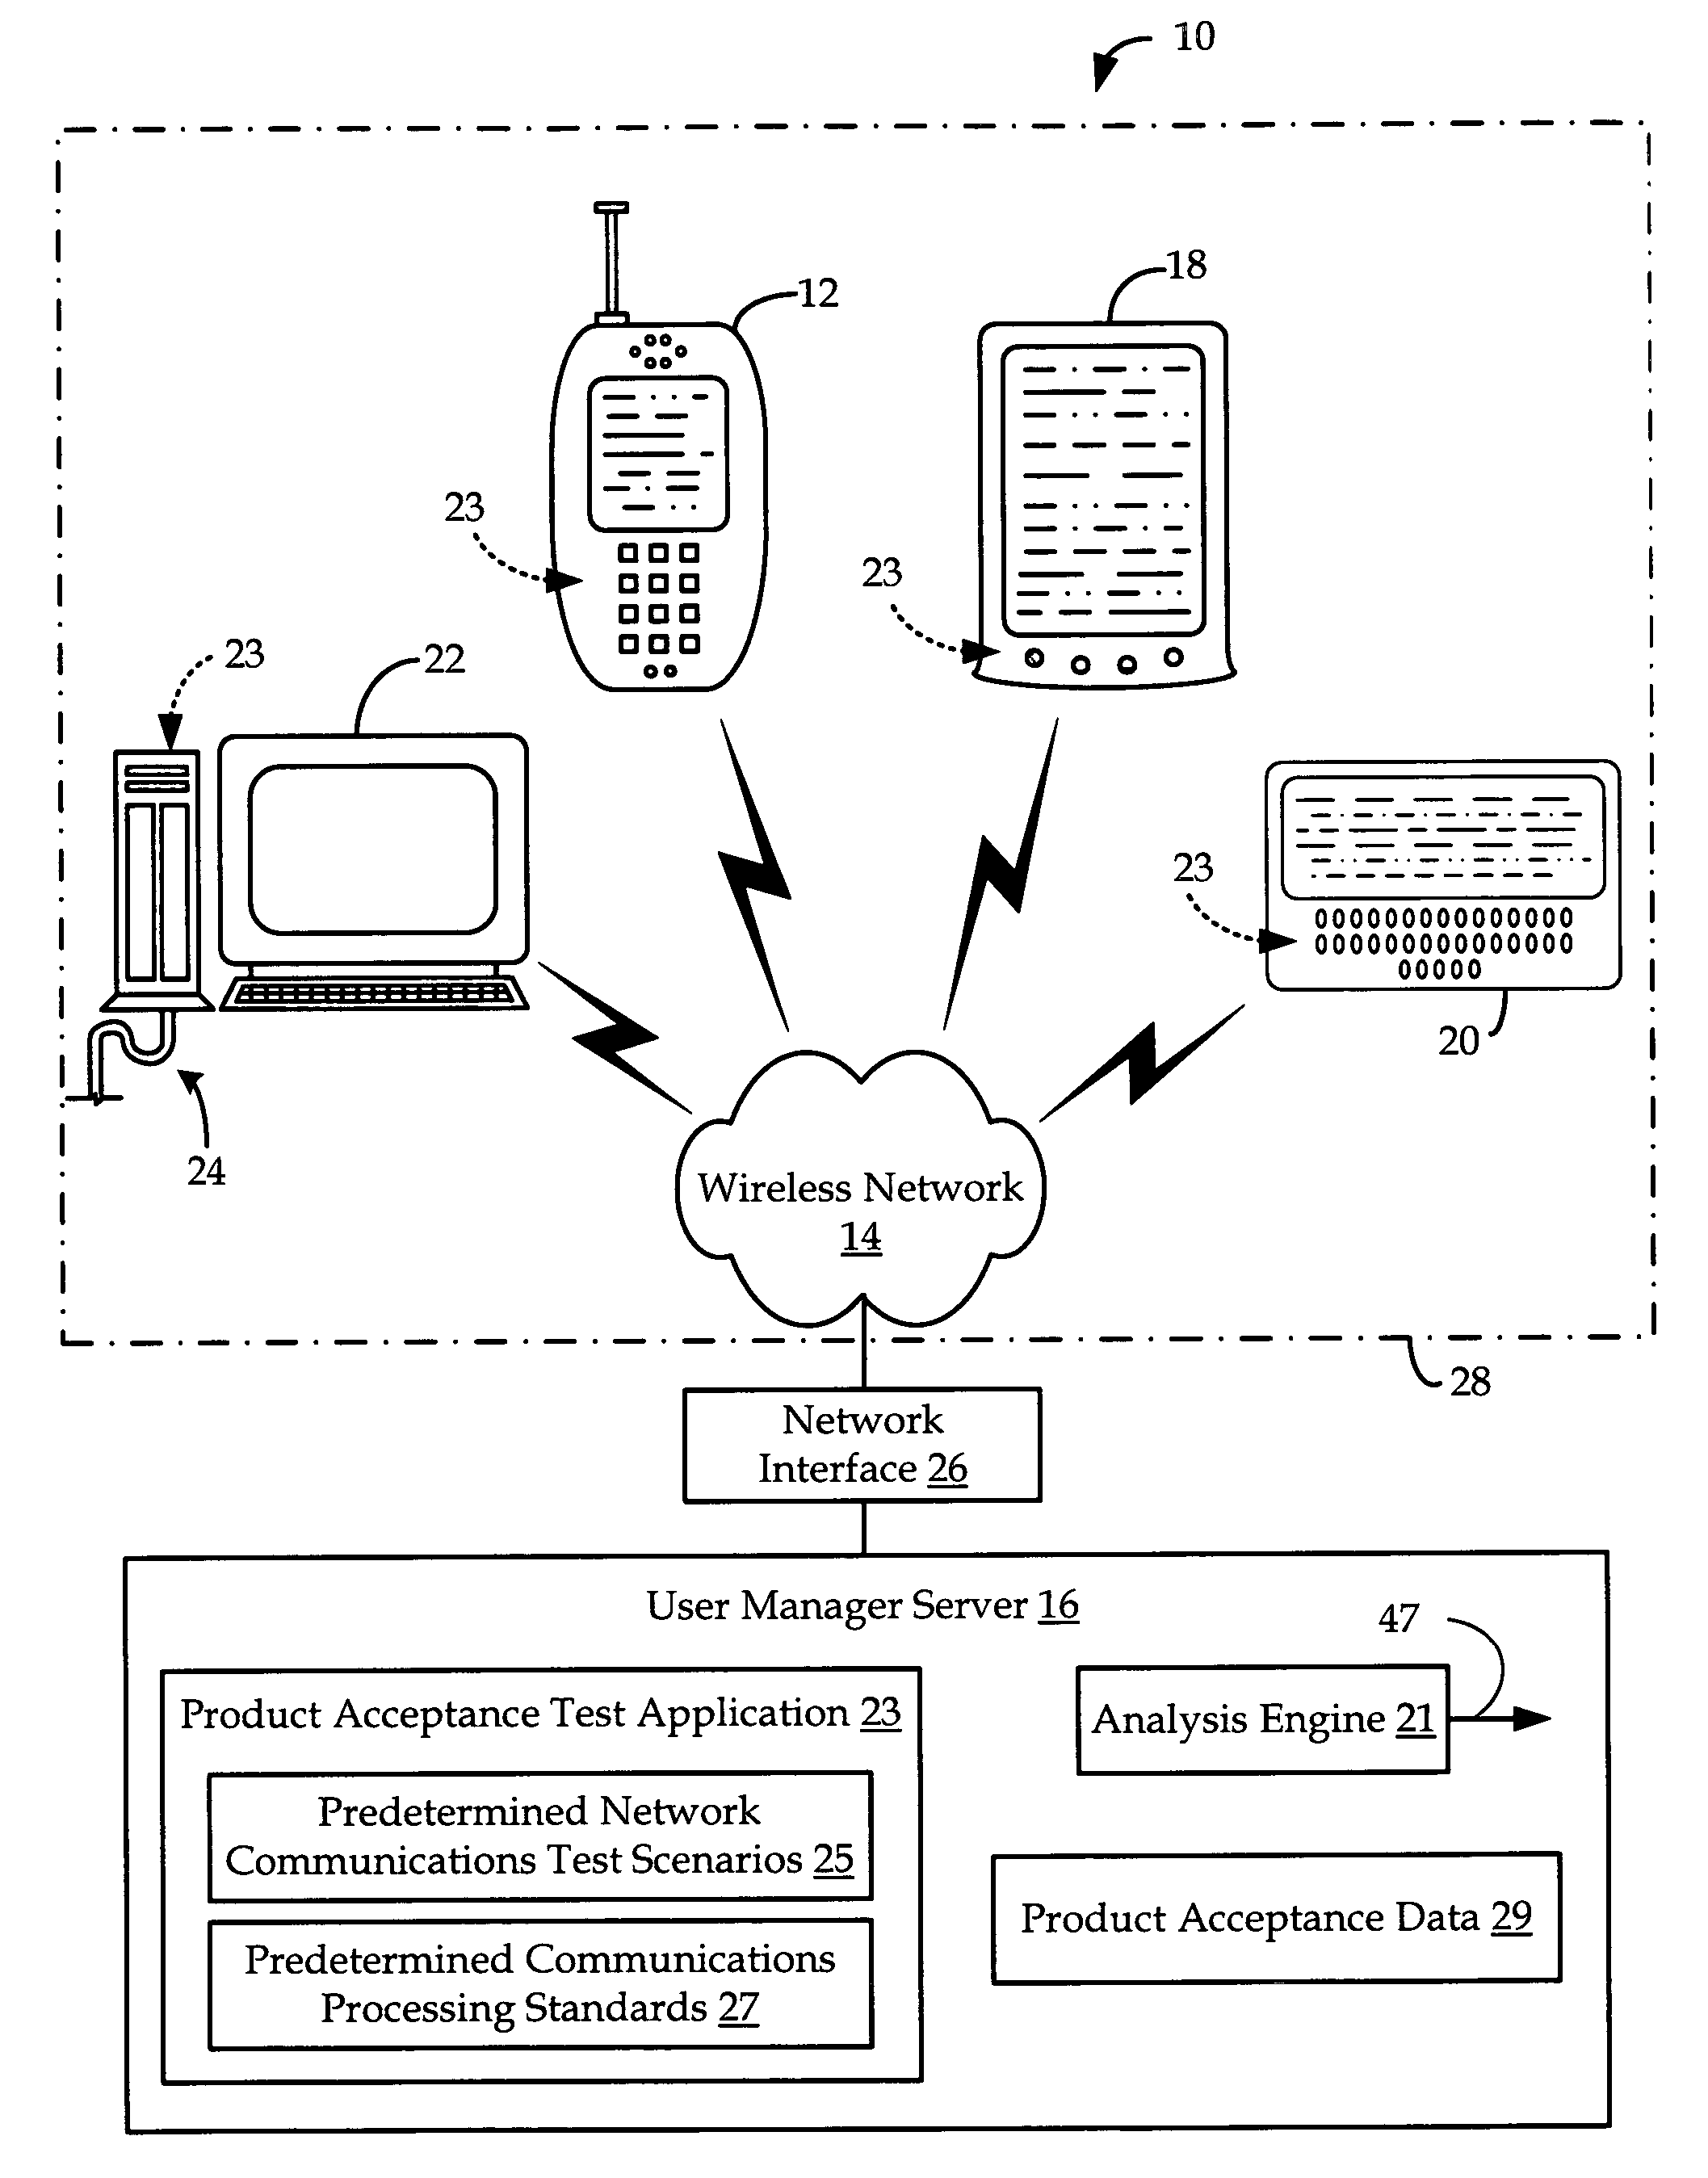 Apparatus and methods for product acceptance testing on a wireless device